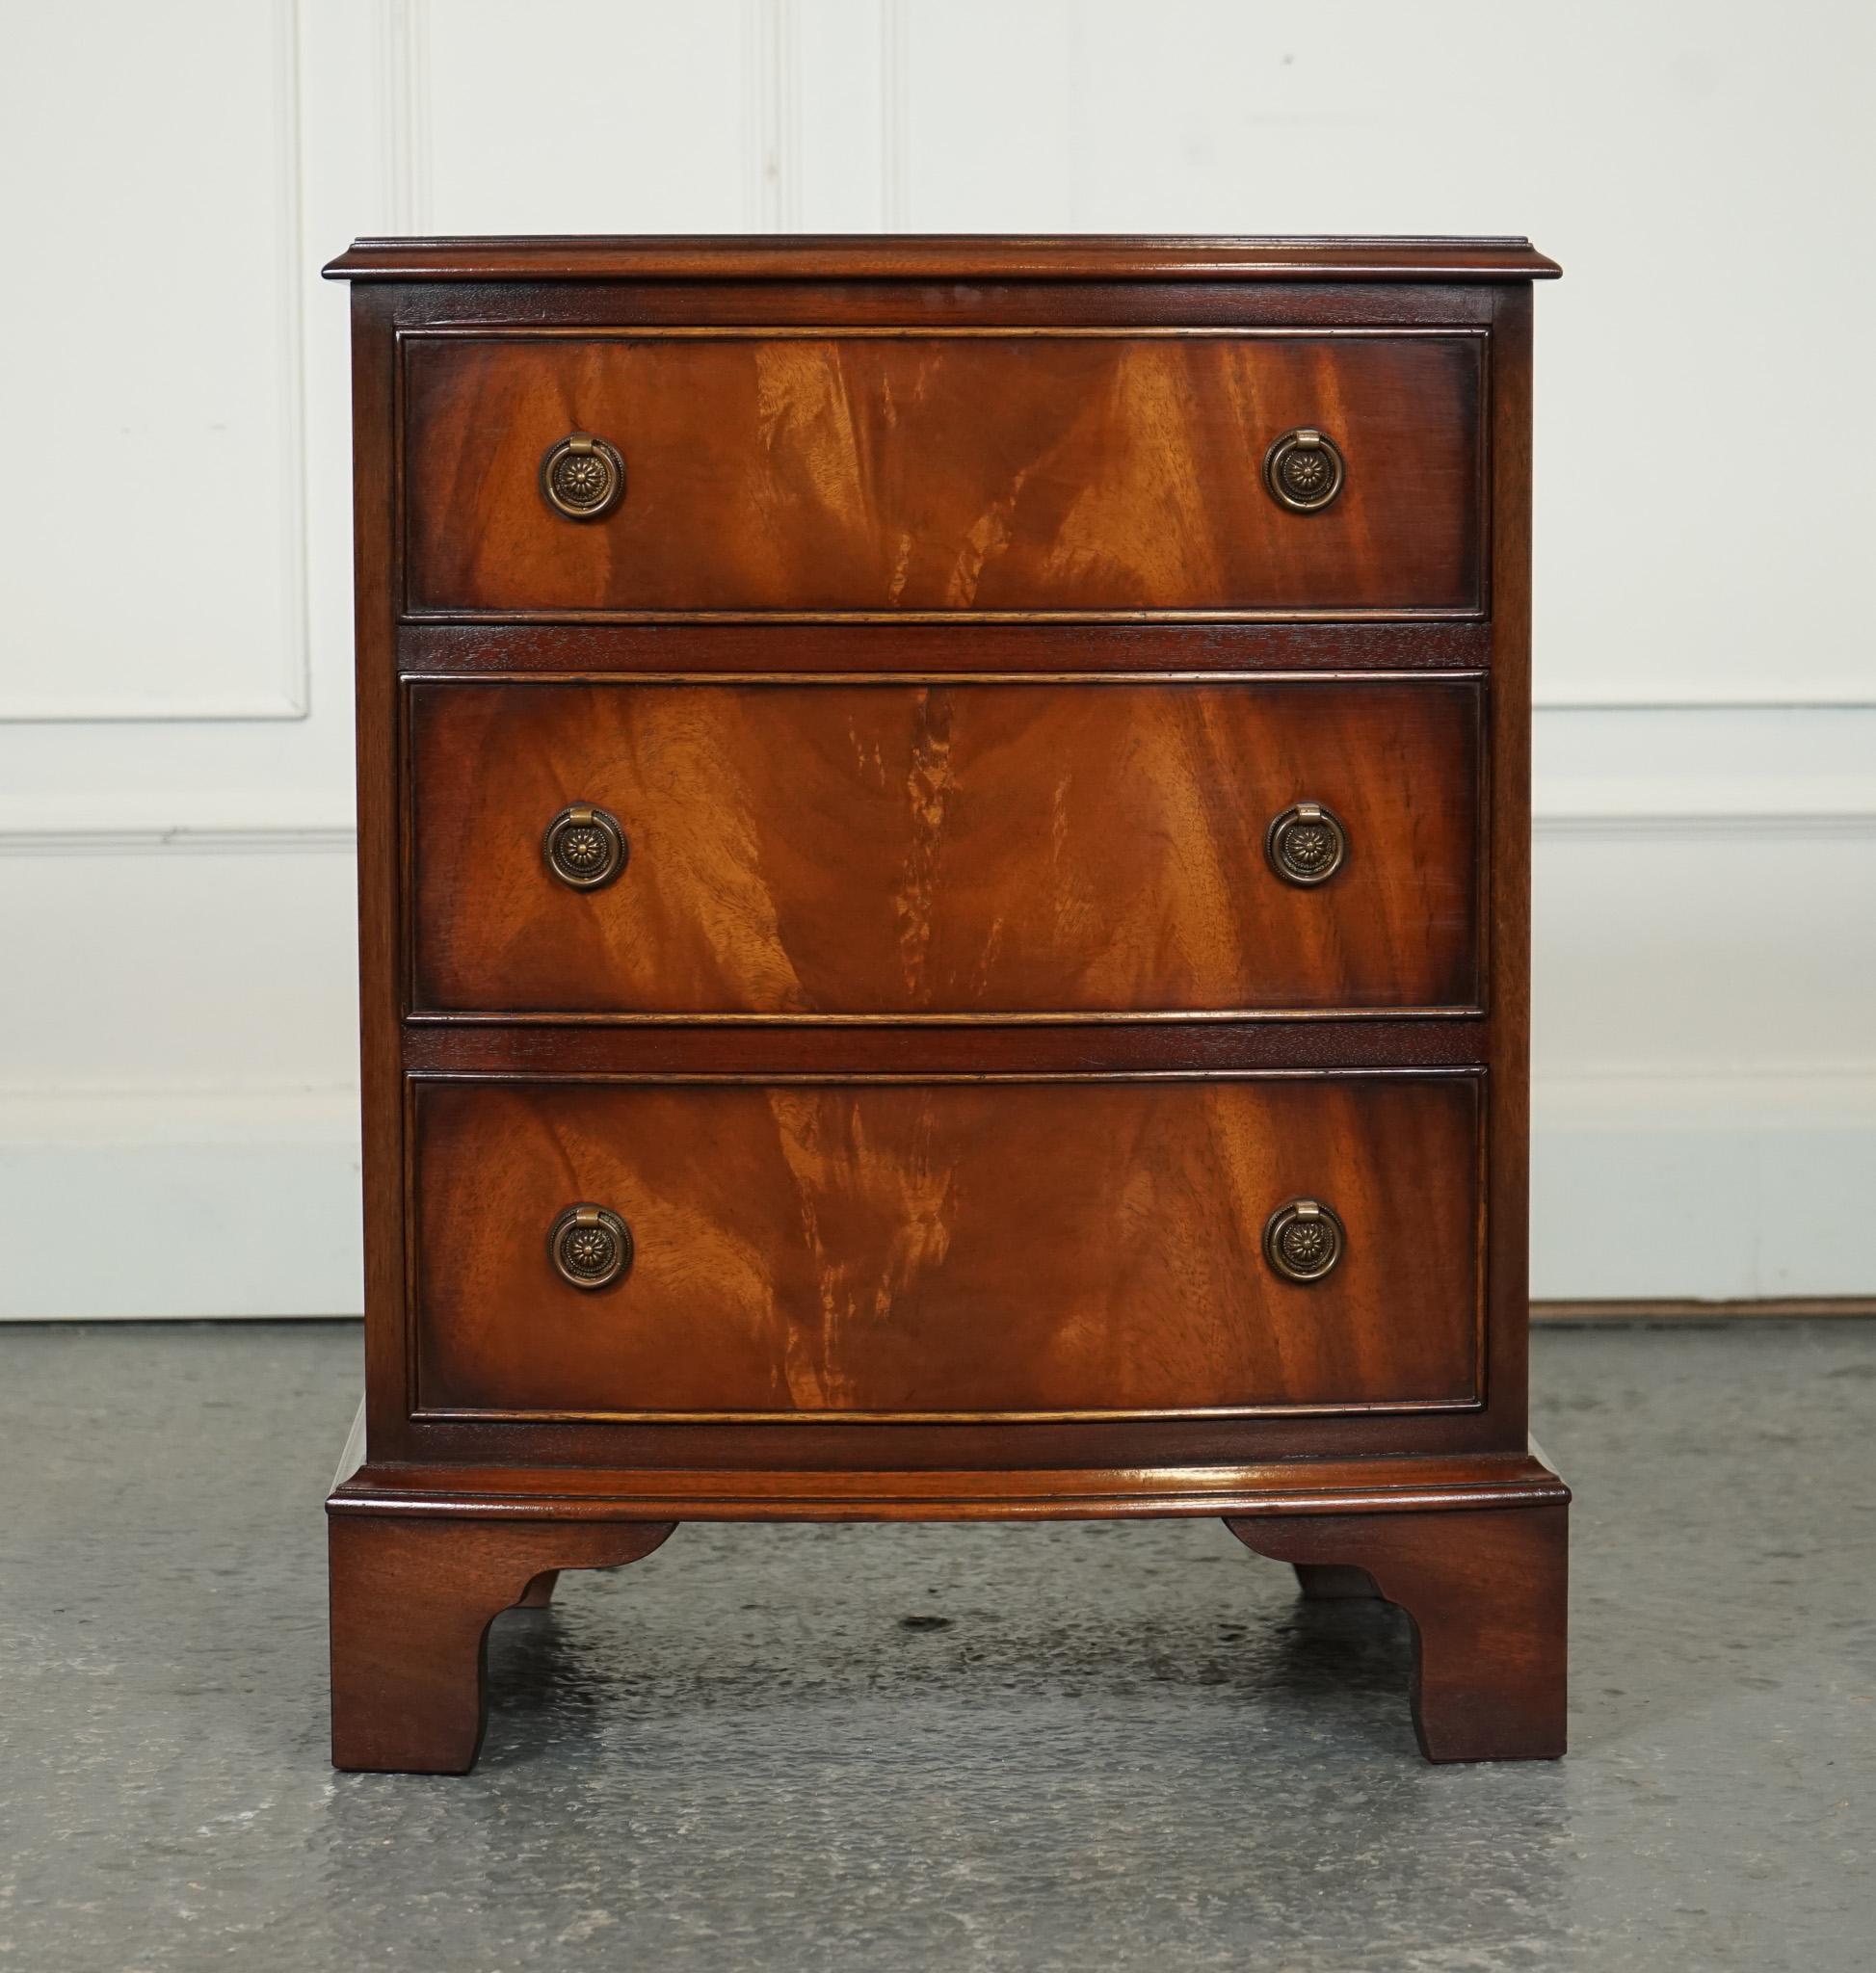 British ViNTAGE GEORGIAN STYLE CHEST OF DRAWERS BEVAN FUNELL J1 For Sale